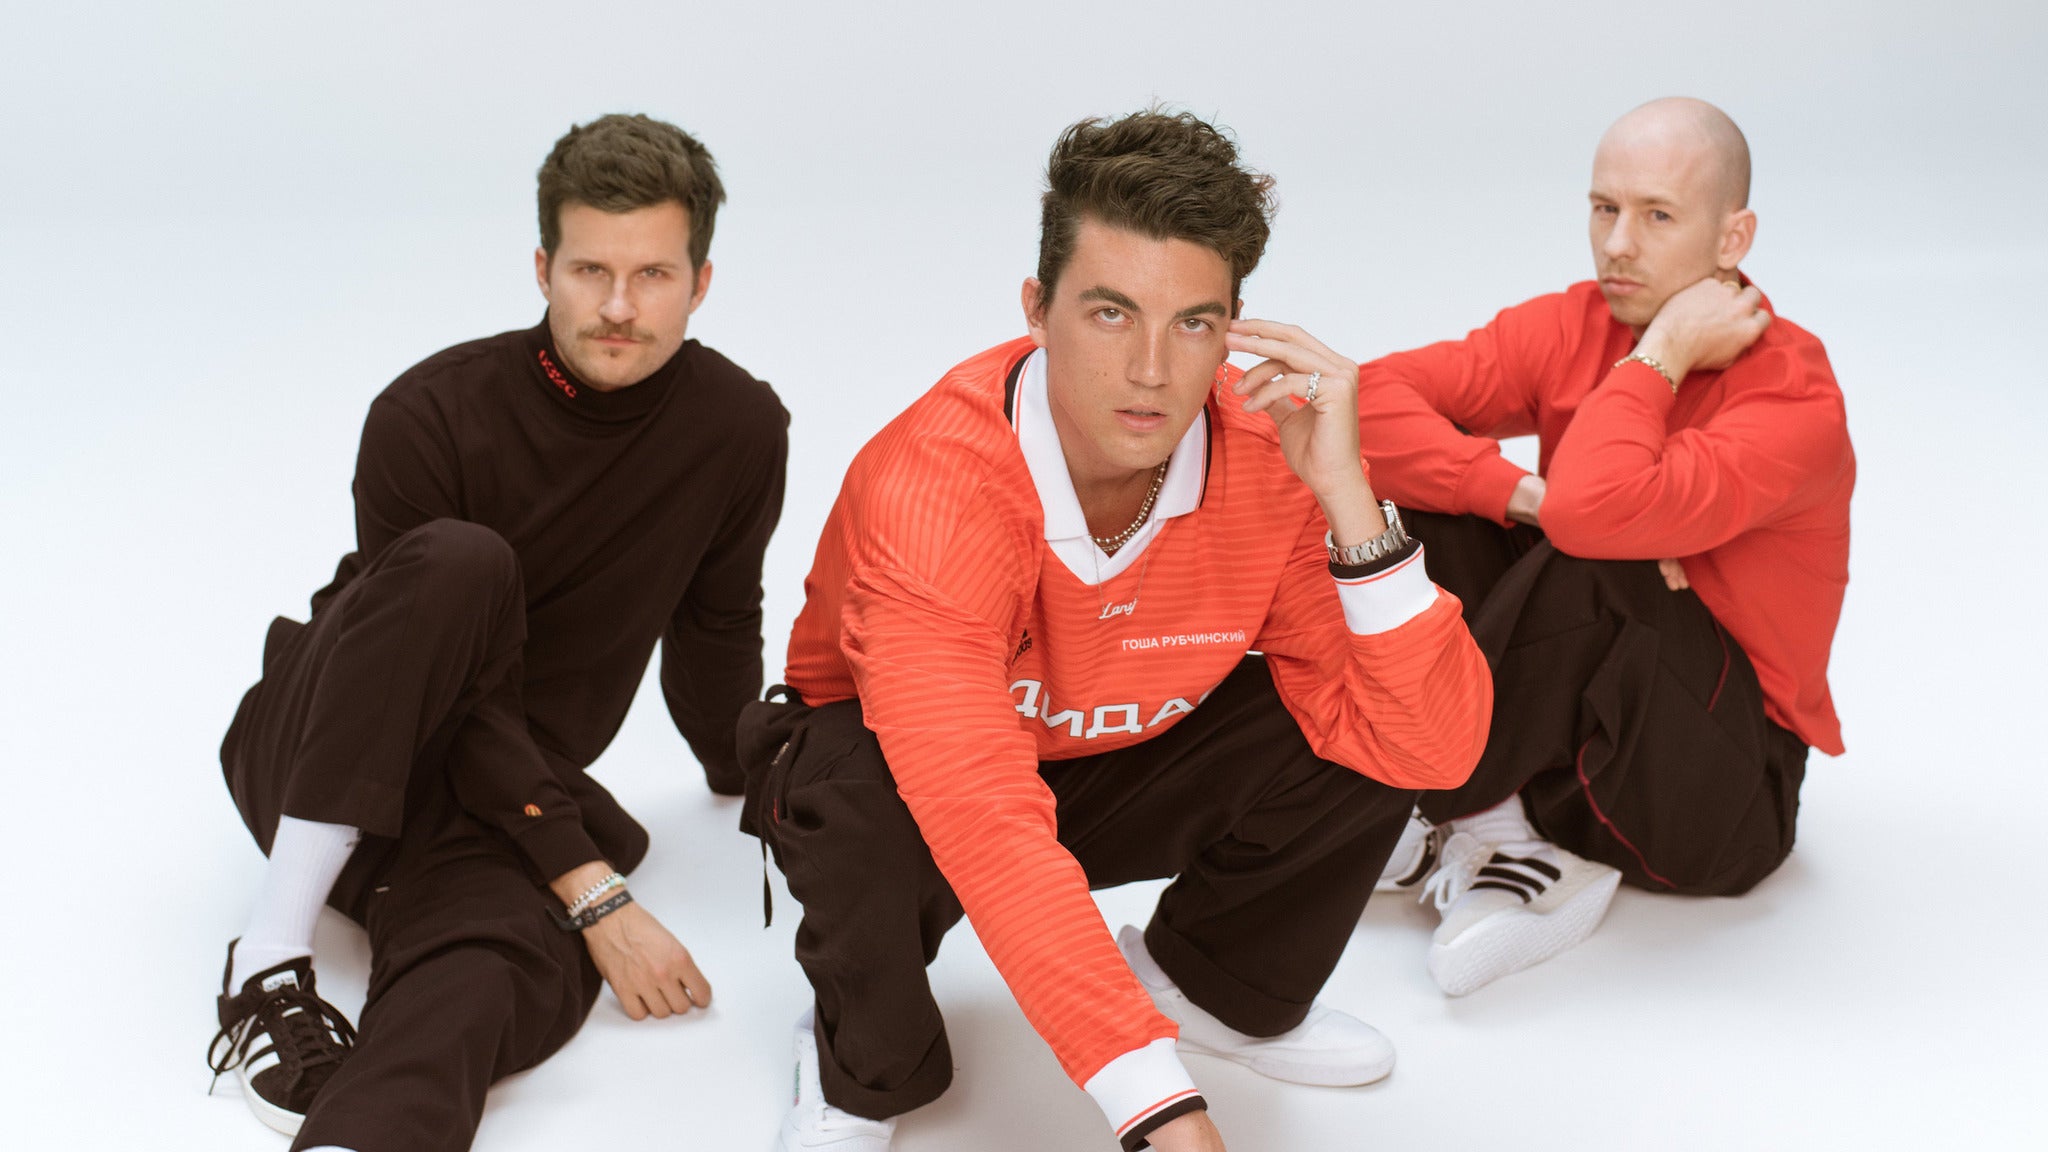 The LANY tour. in Cincinnati promo photo for Promoter presale offer code